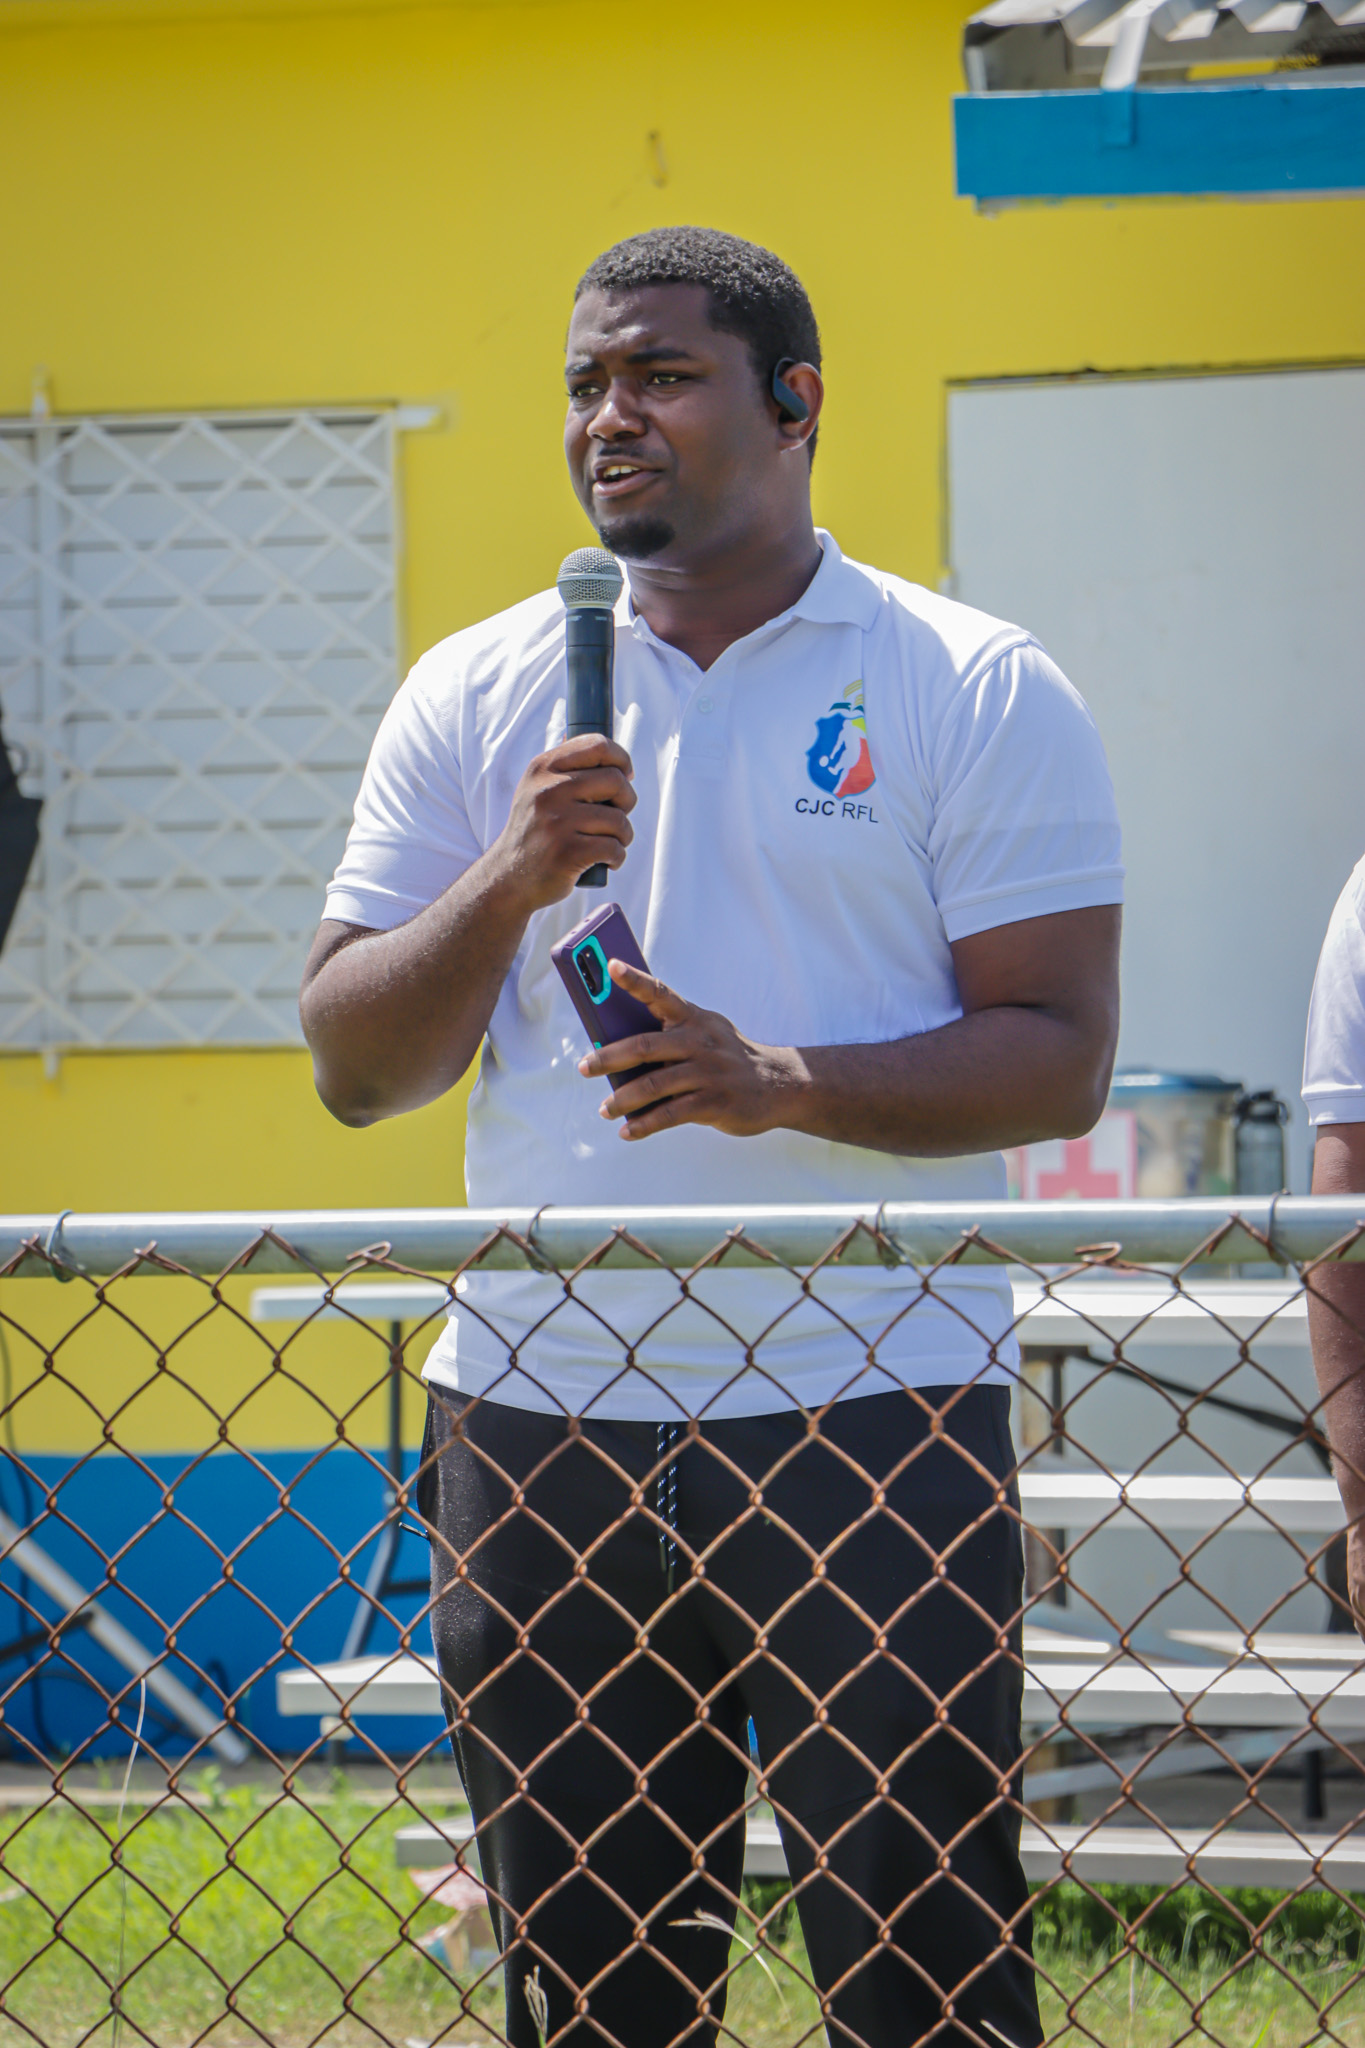 CJC Youth Director, Pastor Dwayne Scott, greets attendees at the opening ceremony for the Recreation League. Photo credit: Ragel Barrett